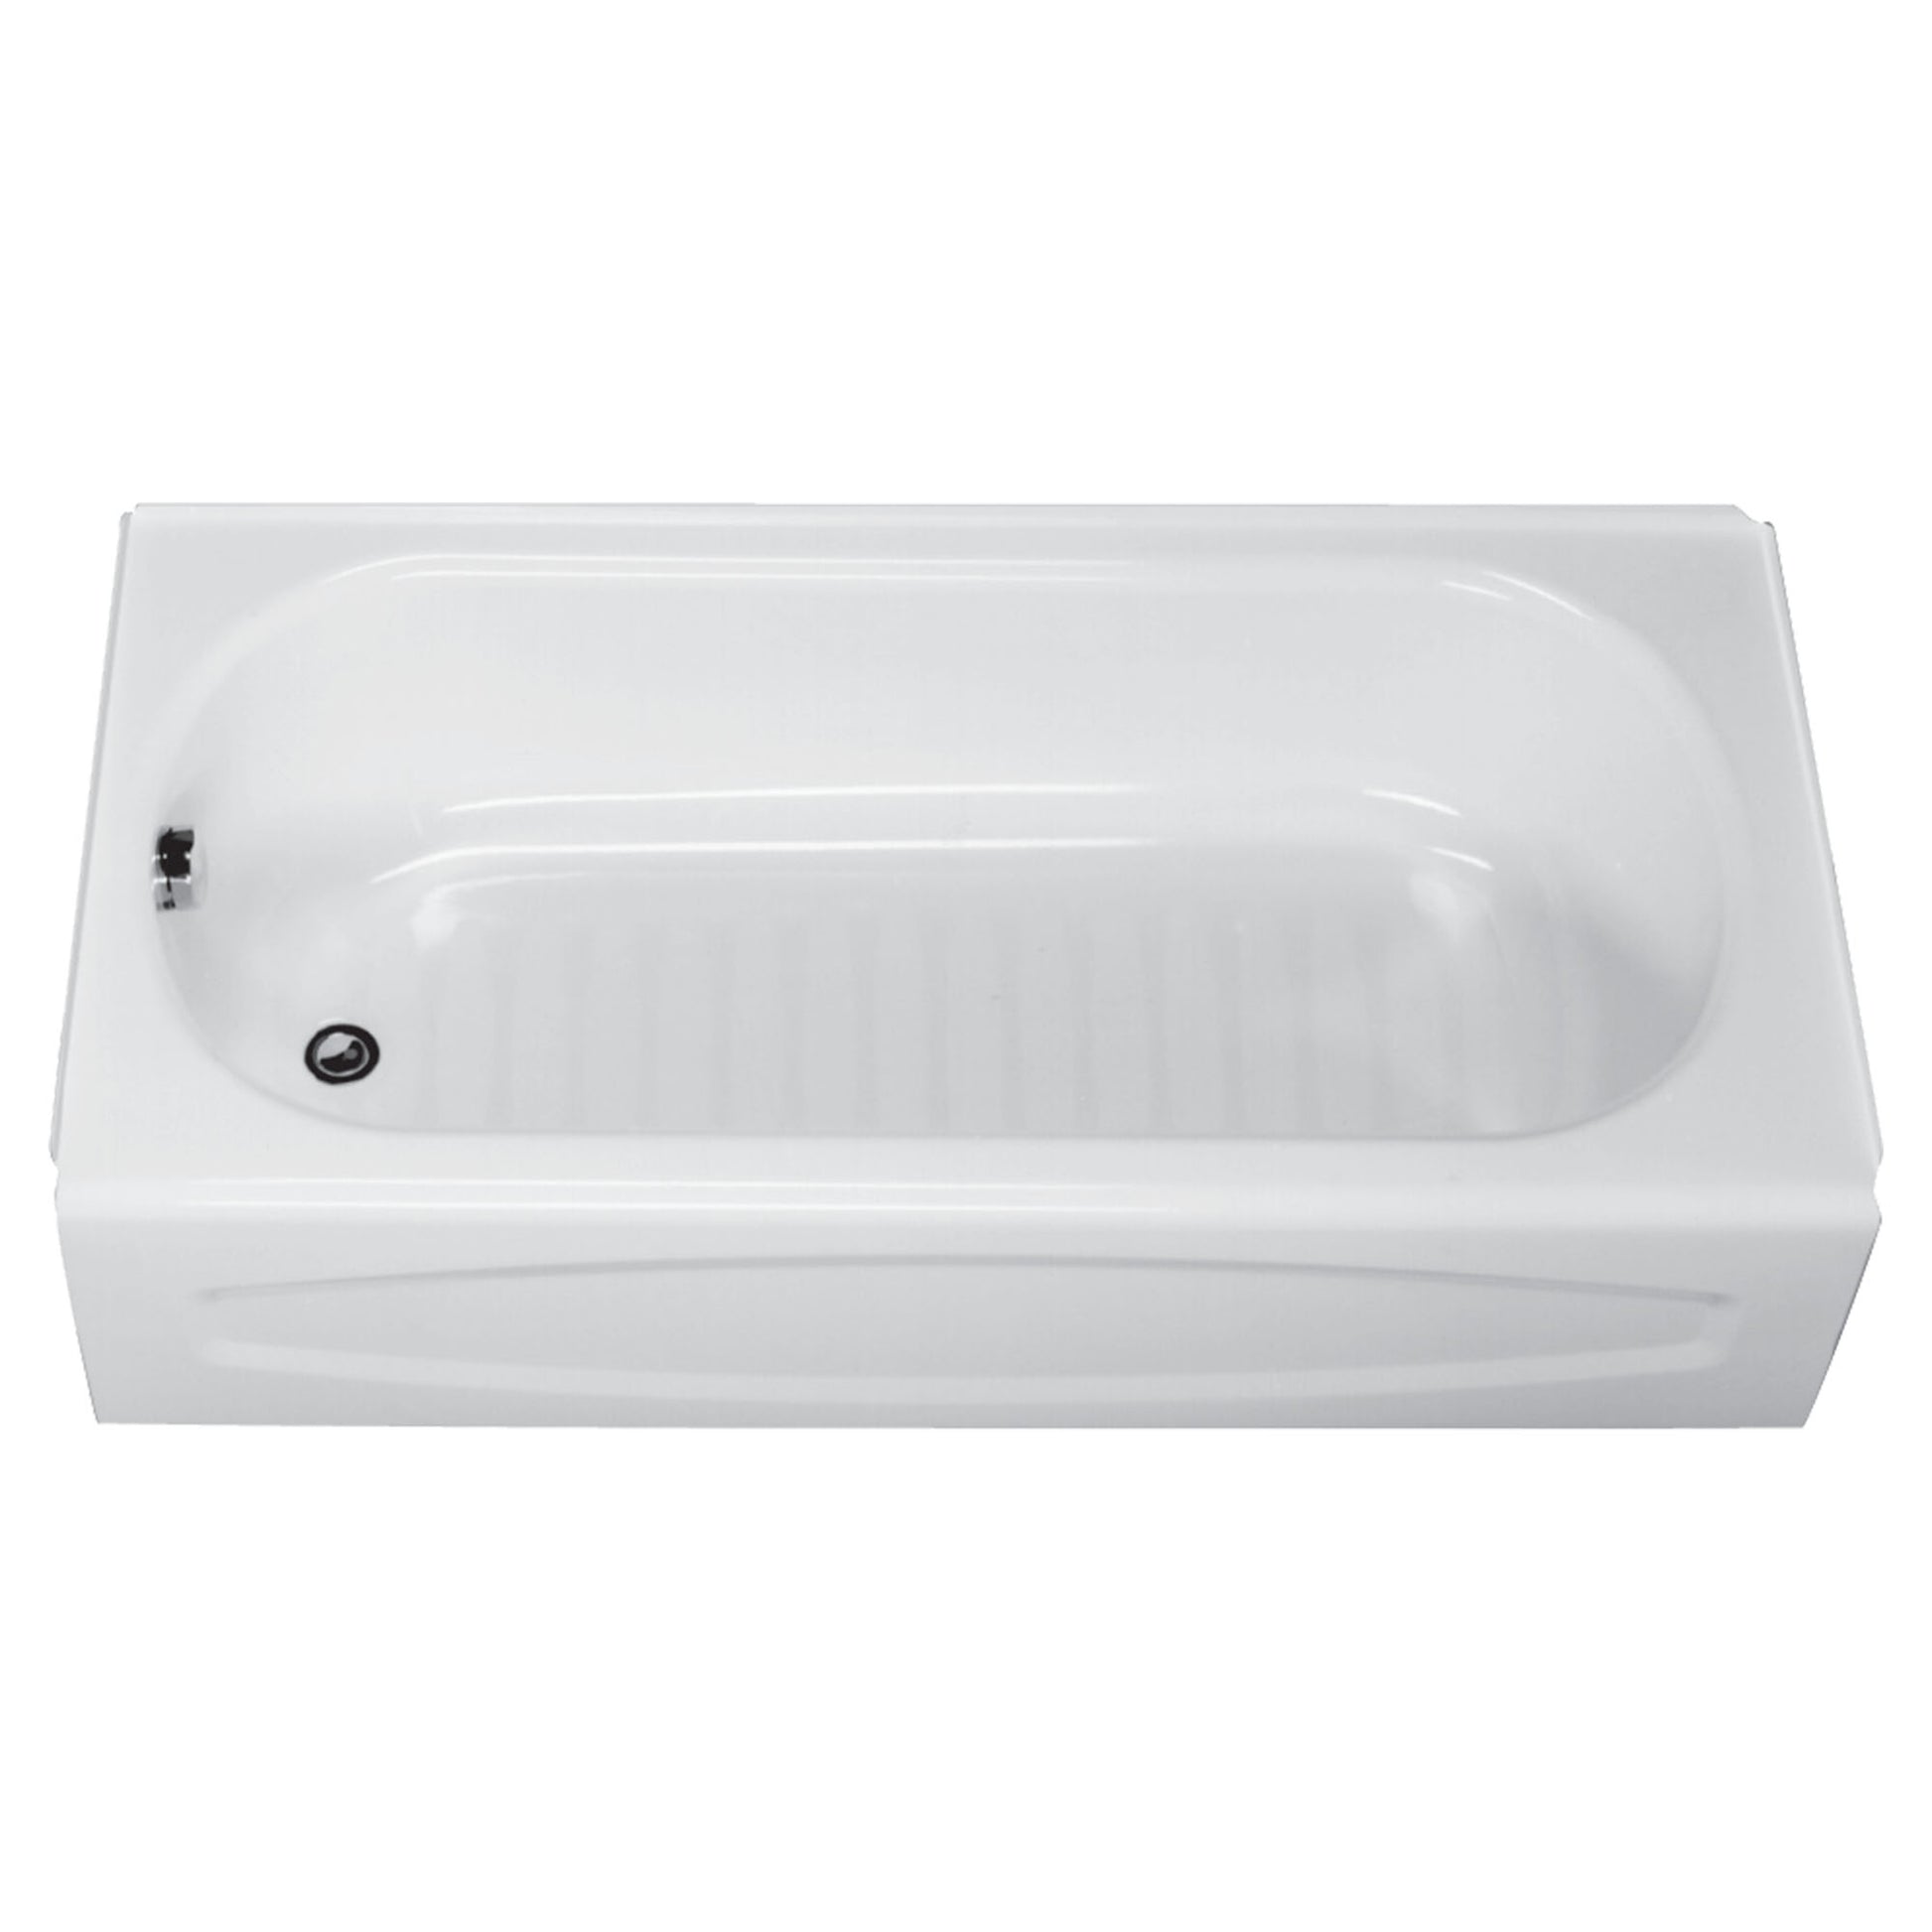 AMERICAN-STANDARD 0255212.020, New Salem 60 x 30-Inch Integral Apron Bathtub With Left-Hand Outlet in White